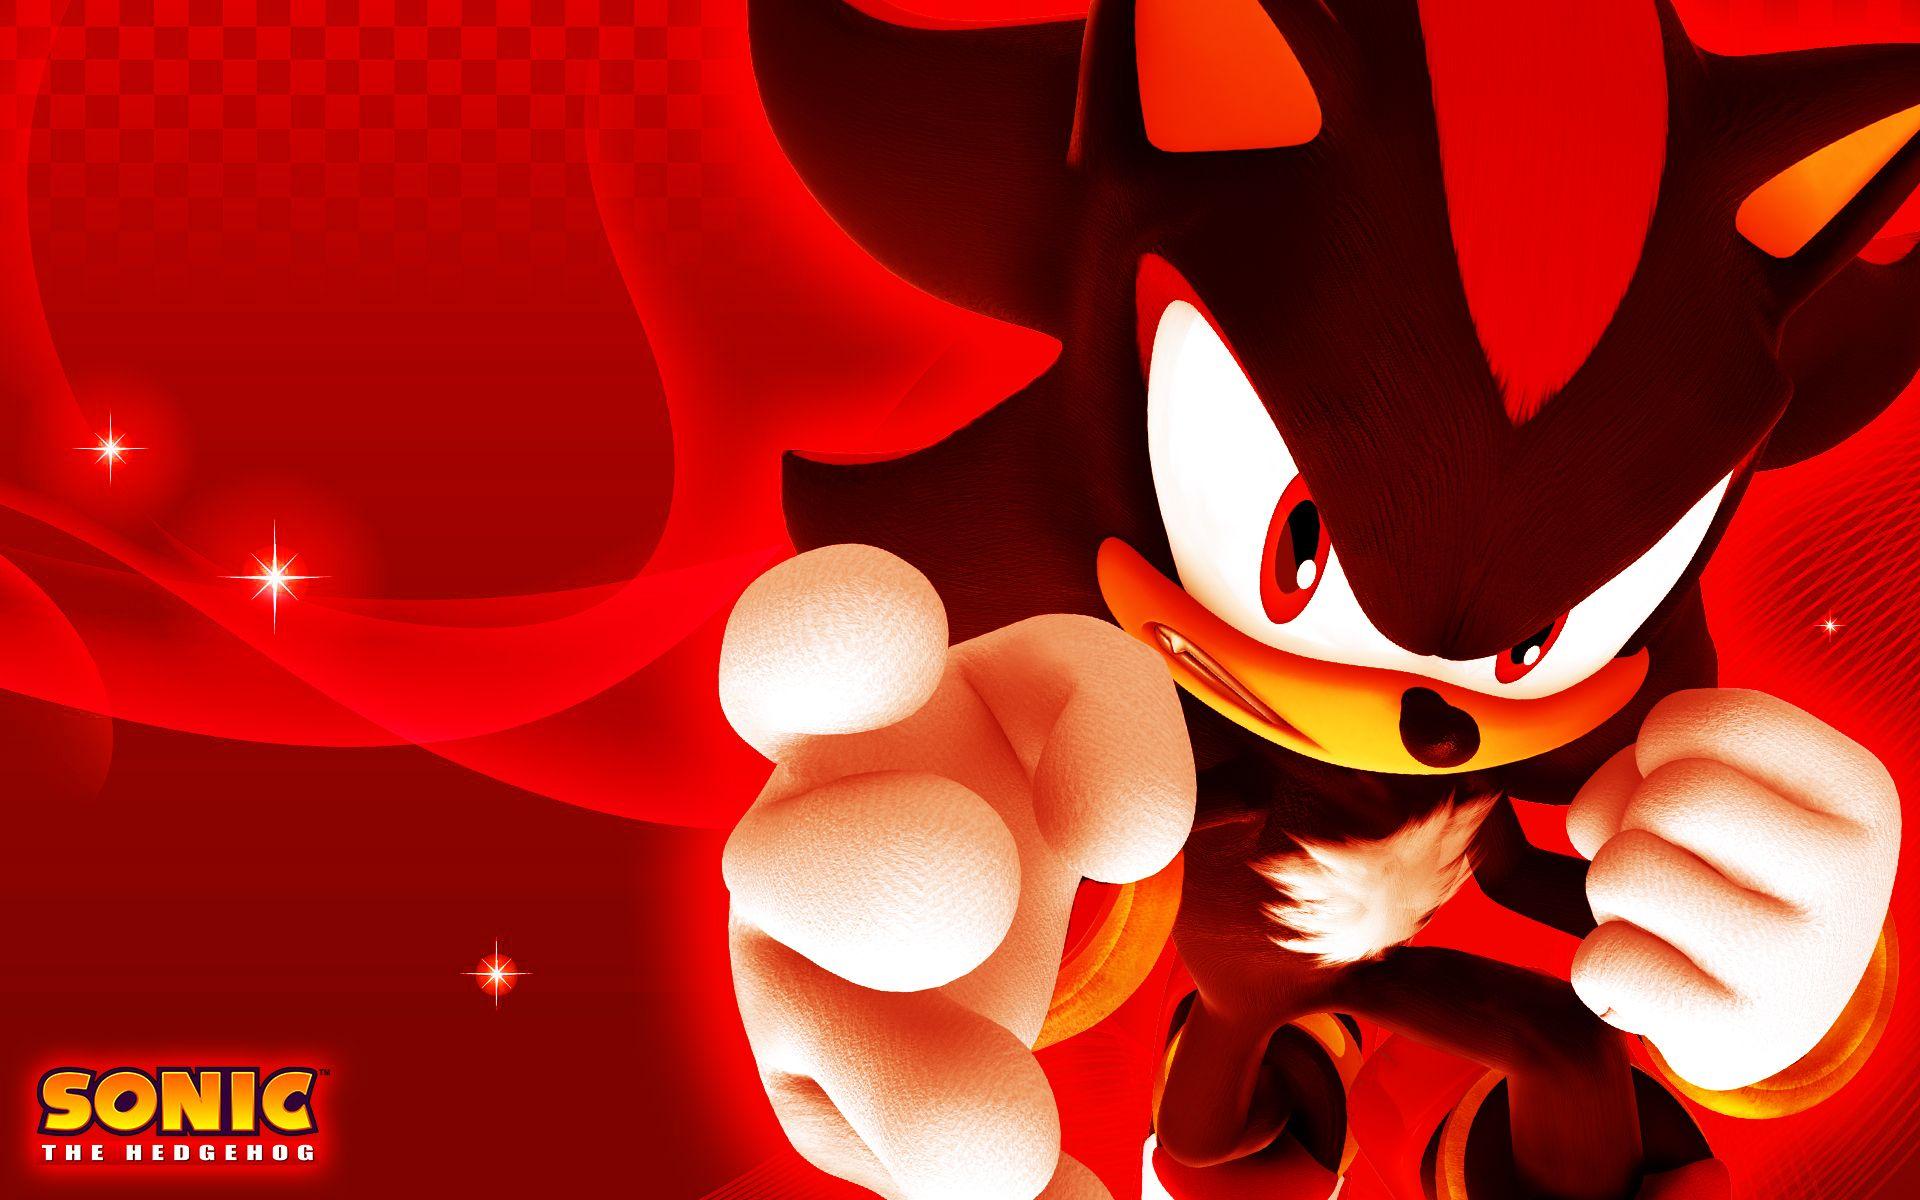 800x1280 Sonic Shadow The Hedgehog 4k Nexus 7Samsung Galaxy Tab 10Note  Android Tablets HD 4k Wallpapers Images Backgrounds Photos and Pictures